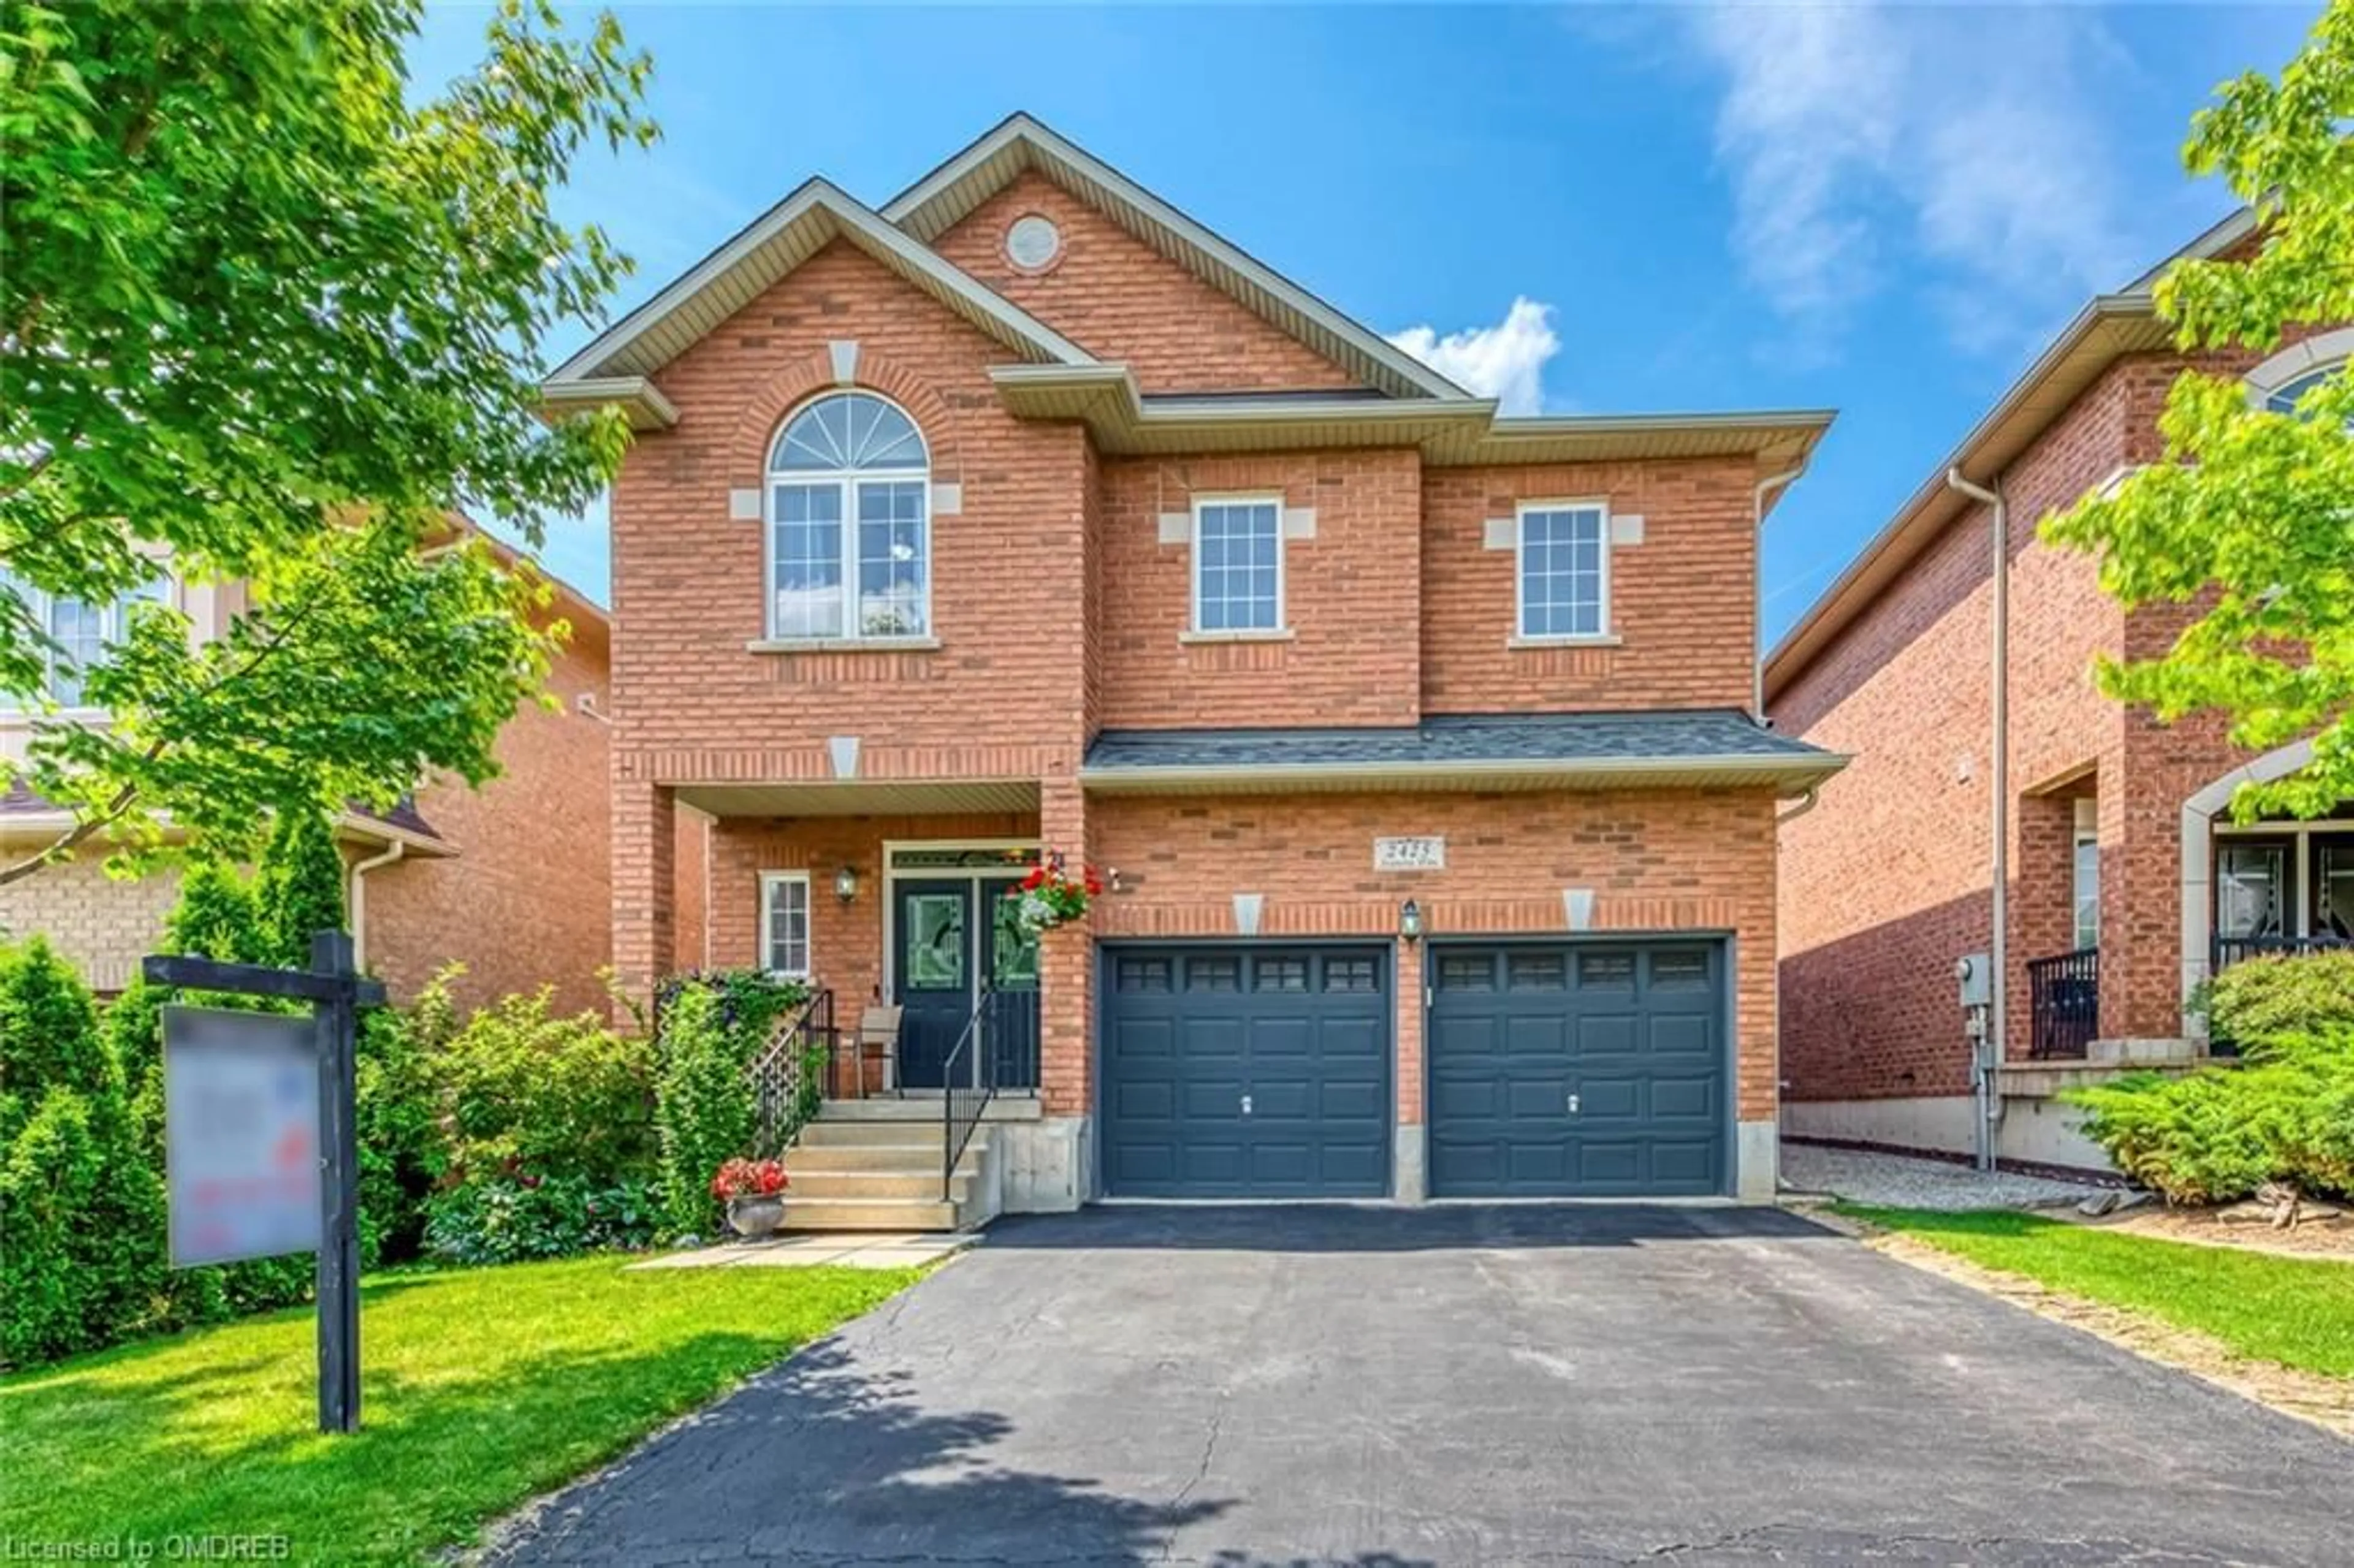 Home with brick exterior material for 2425 Sequoia Way, Oakville Ontario L6M 4Z6